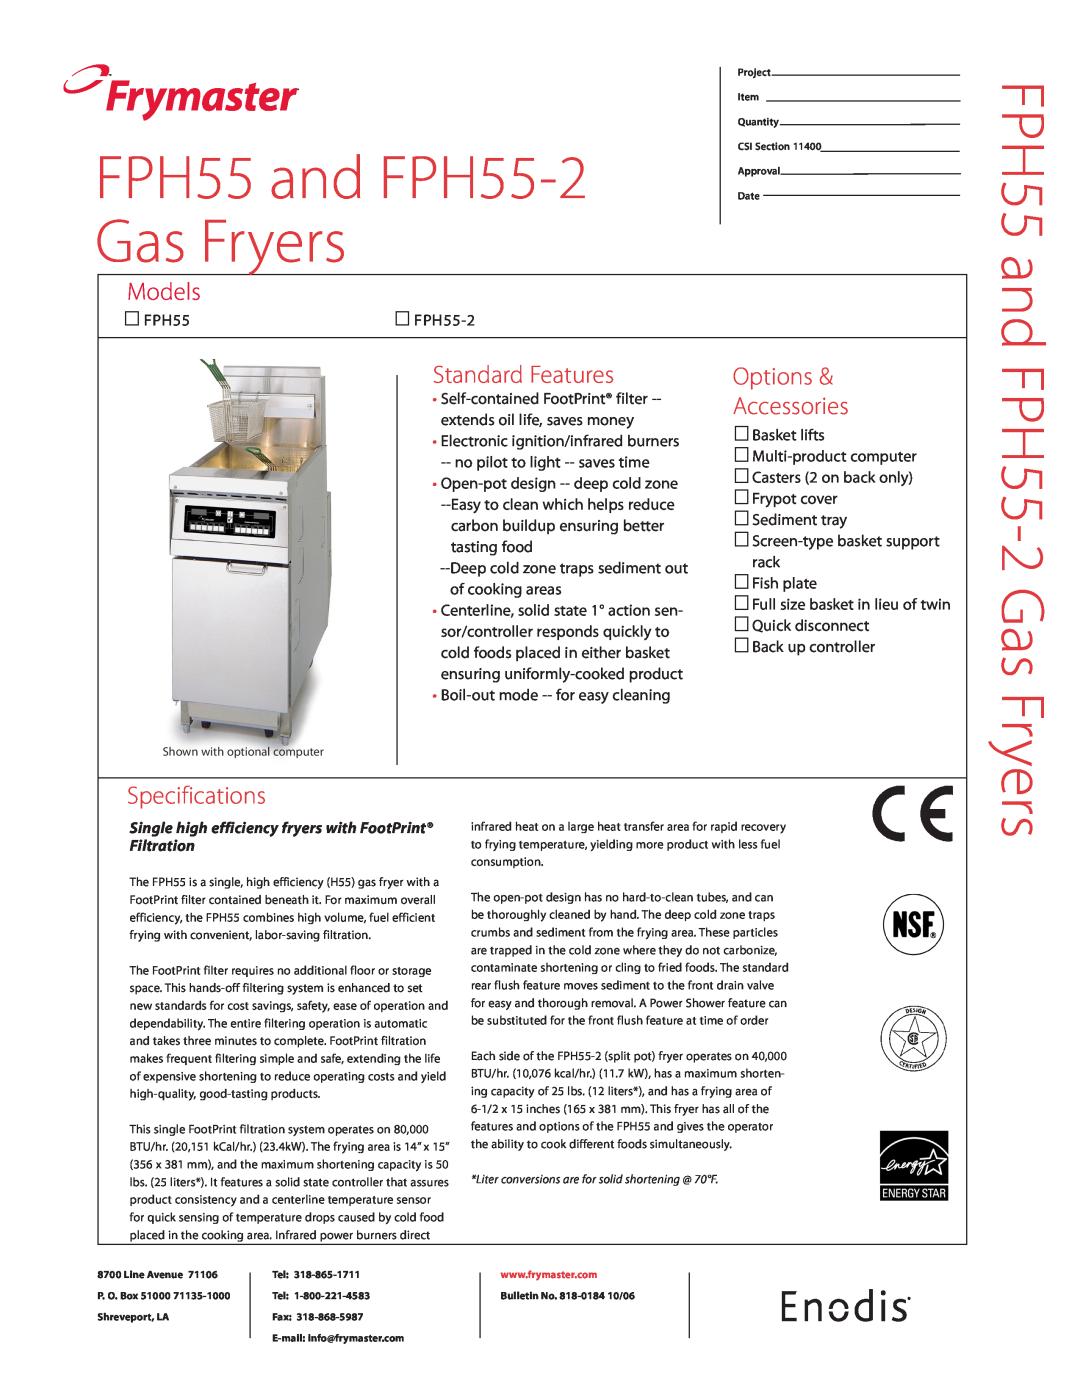 Frymaster specifications Frymaster, FPH55 and FPH55-2 Gas Fryers, Models, Standard Features, Options, Accessories 